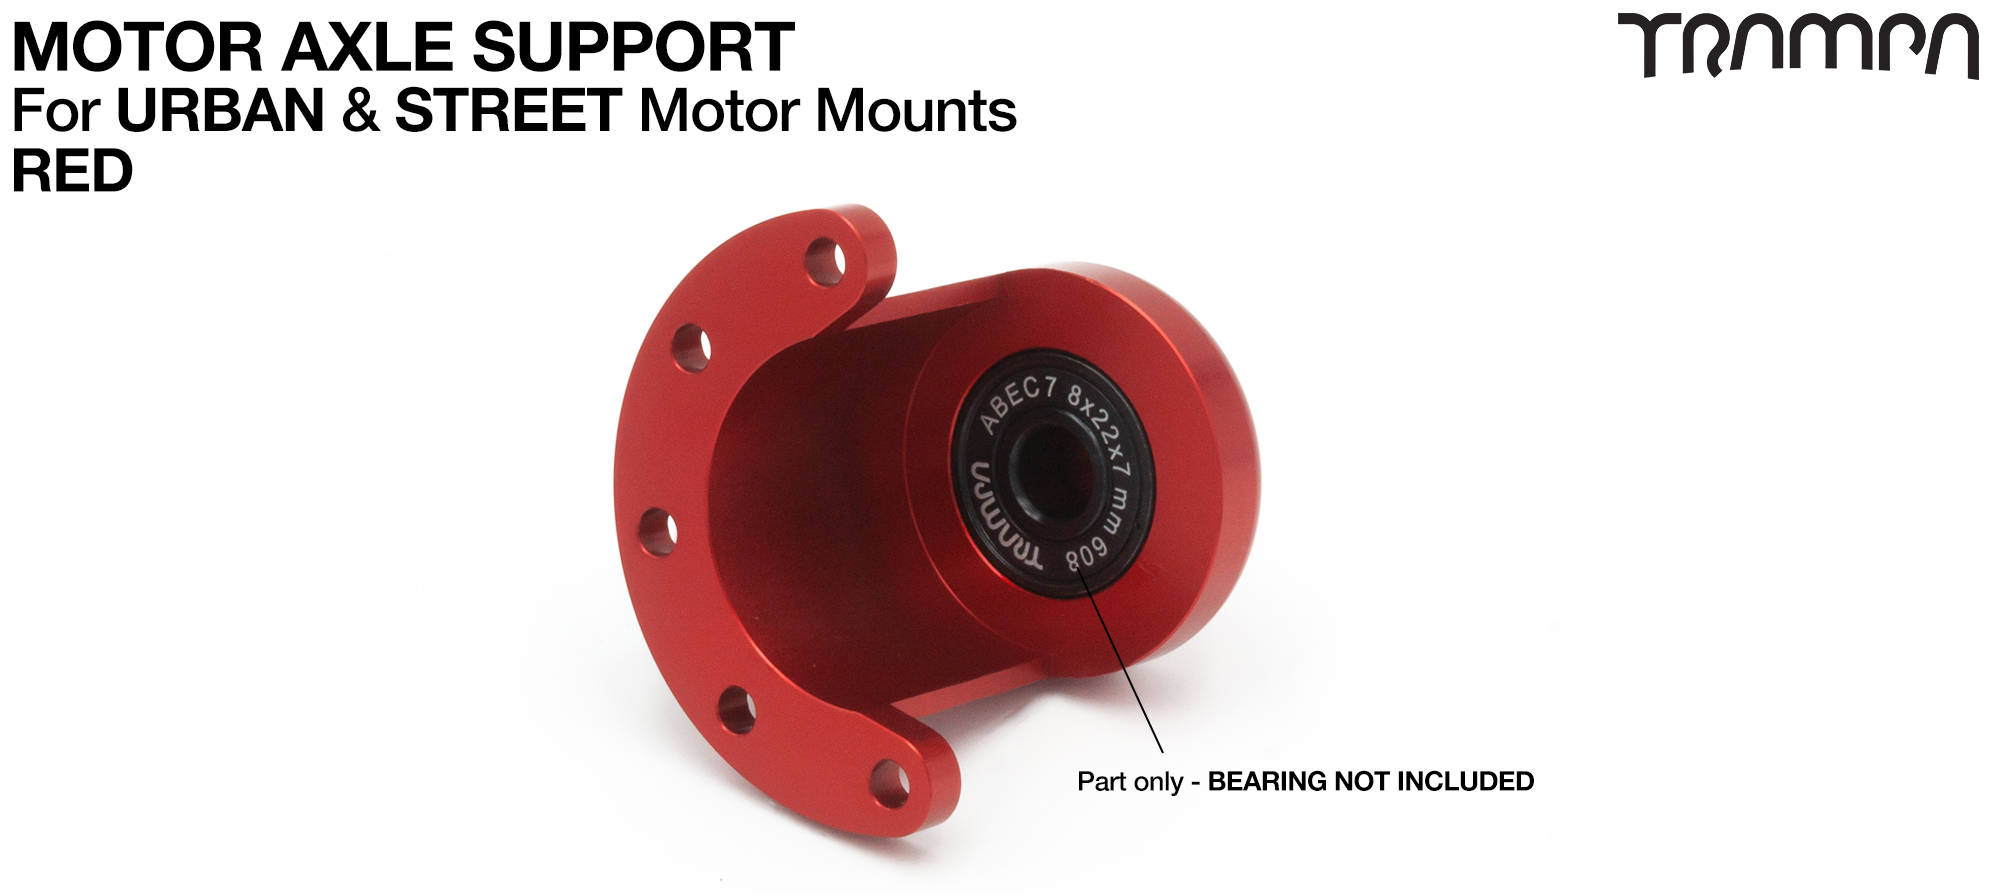 Motor Axle Support for Spring Truck Motor Mounts UNIVERSAL - RED